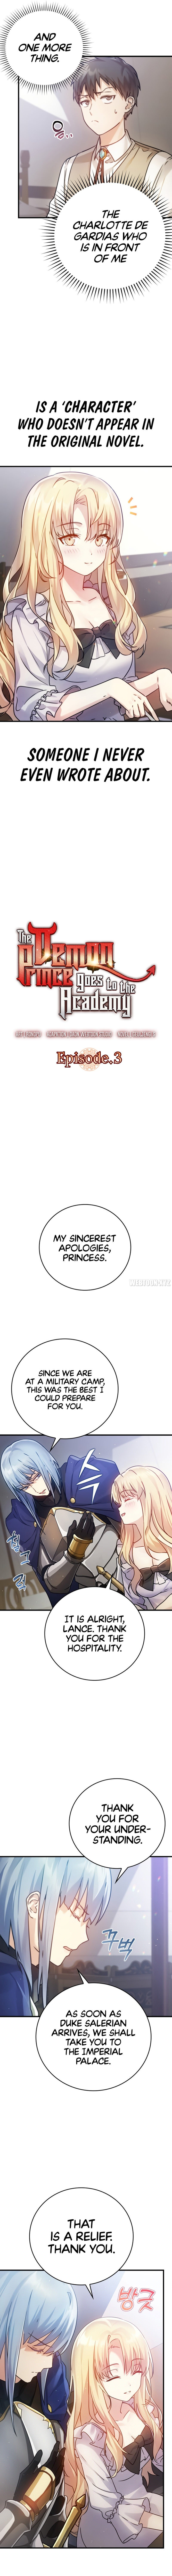 the-demon-prince-goes-to-the-academy-chap-3-3